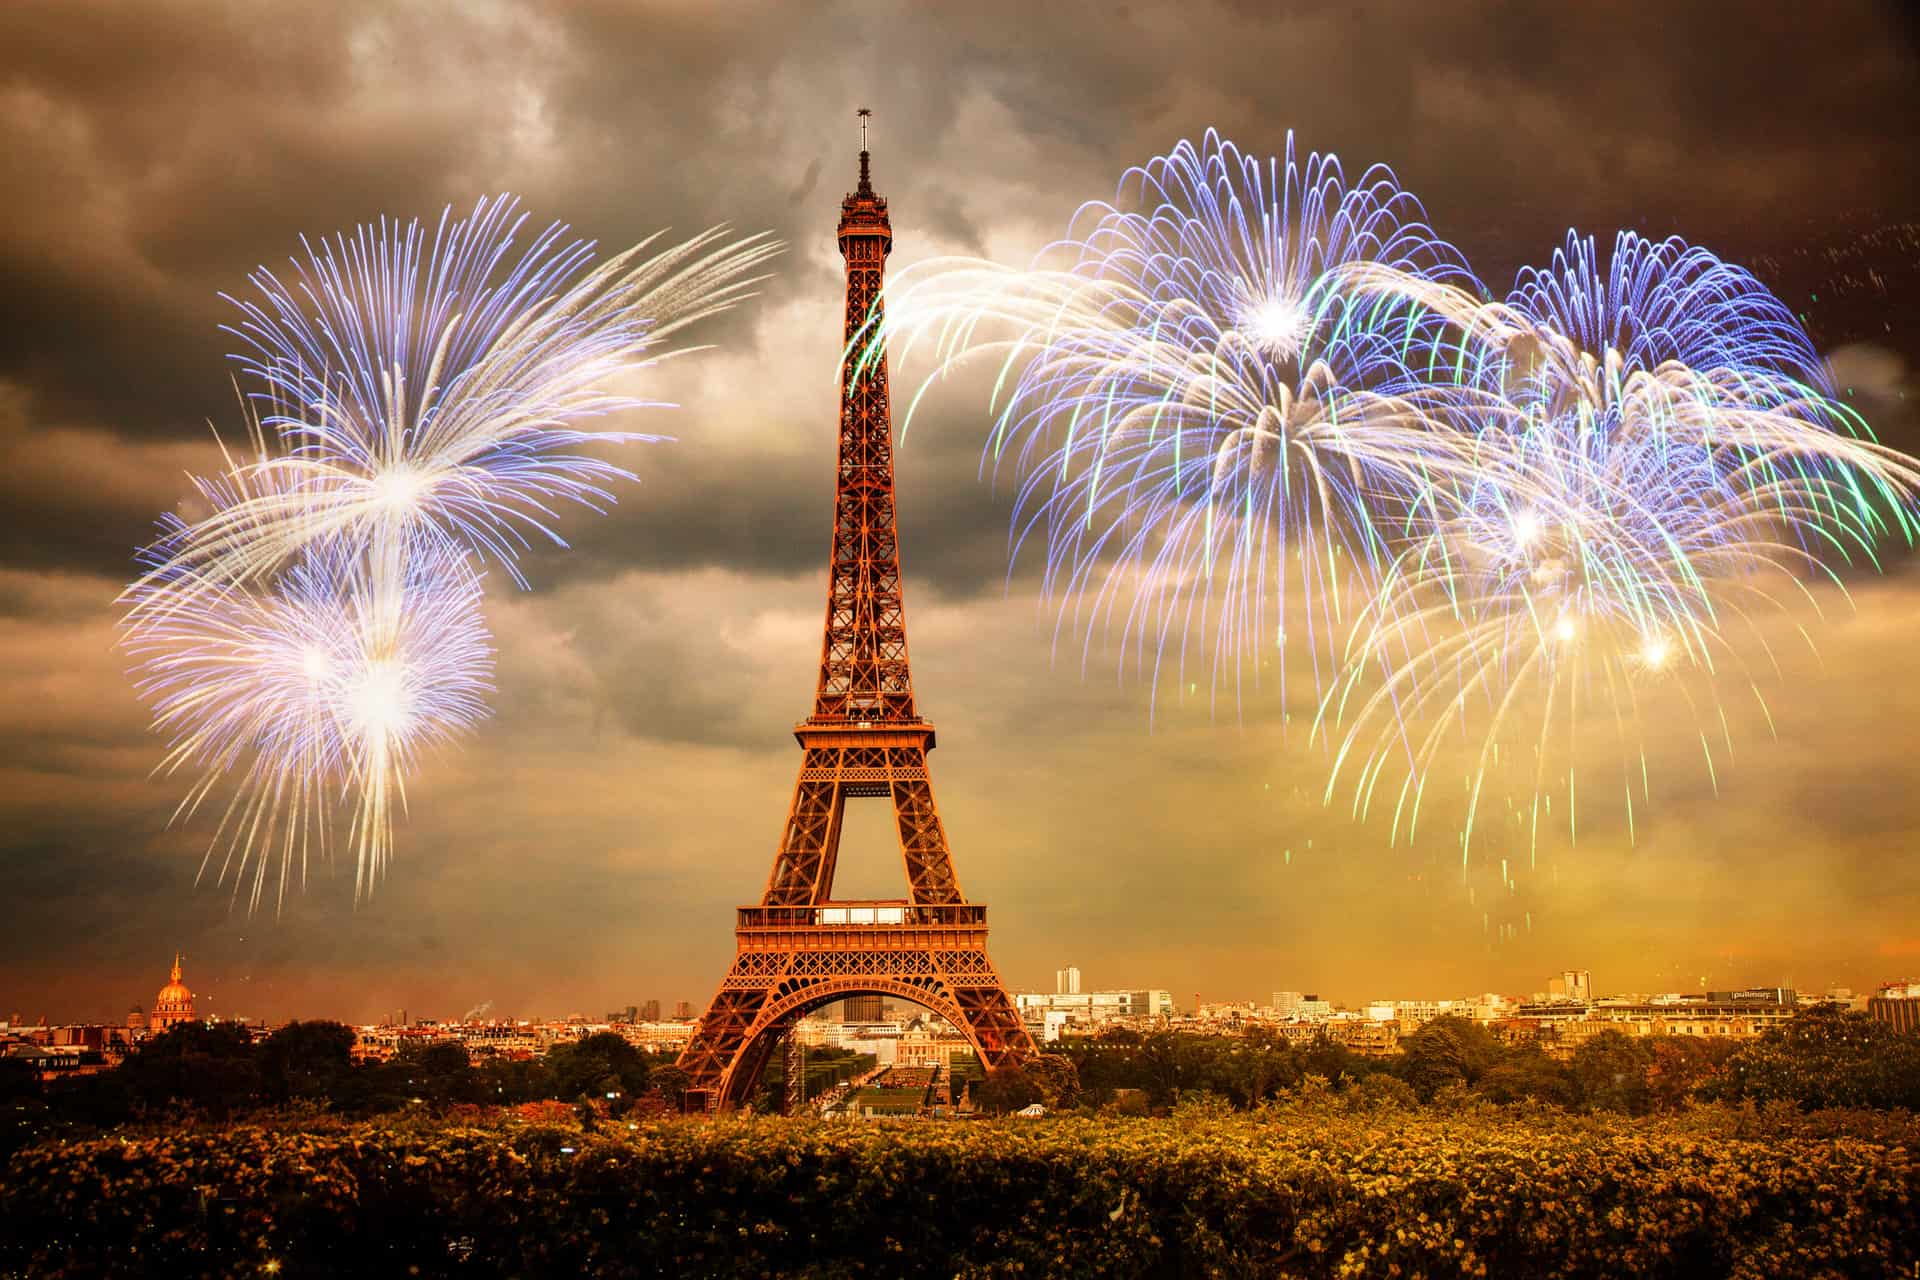 Eifel tower with fireworks going off